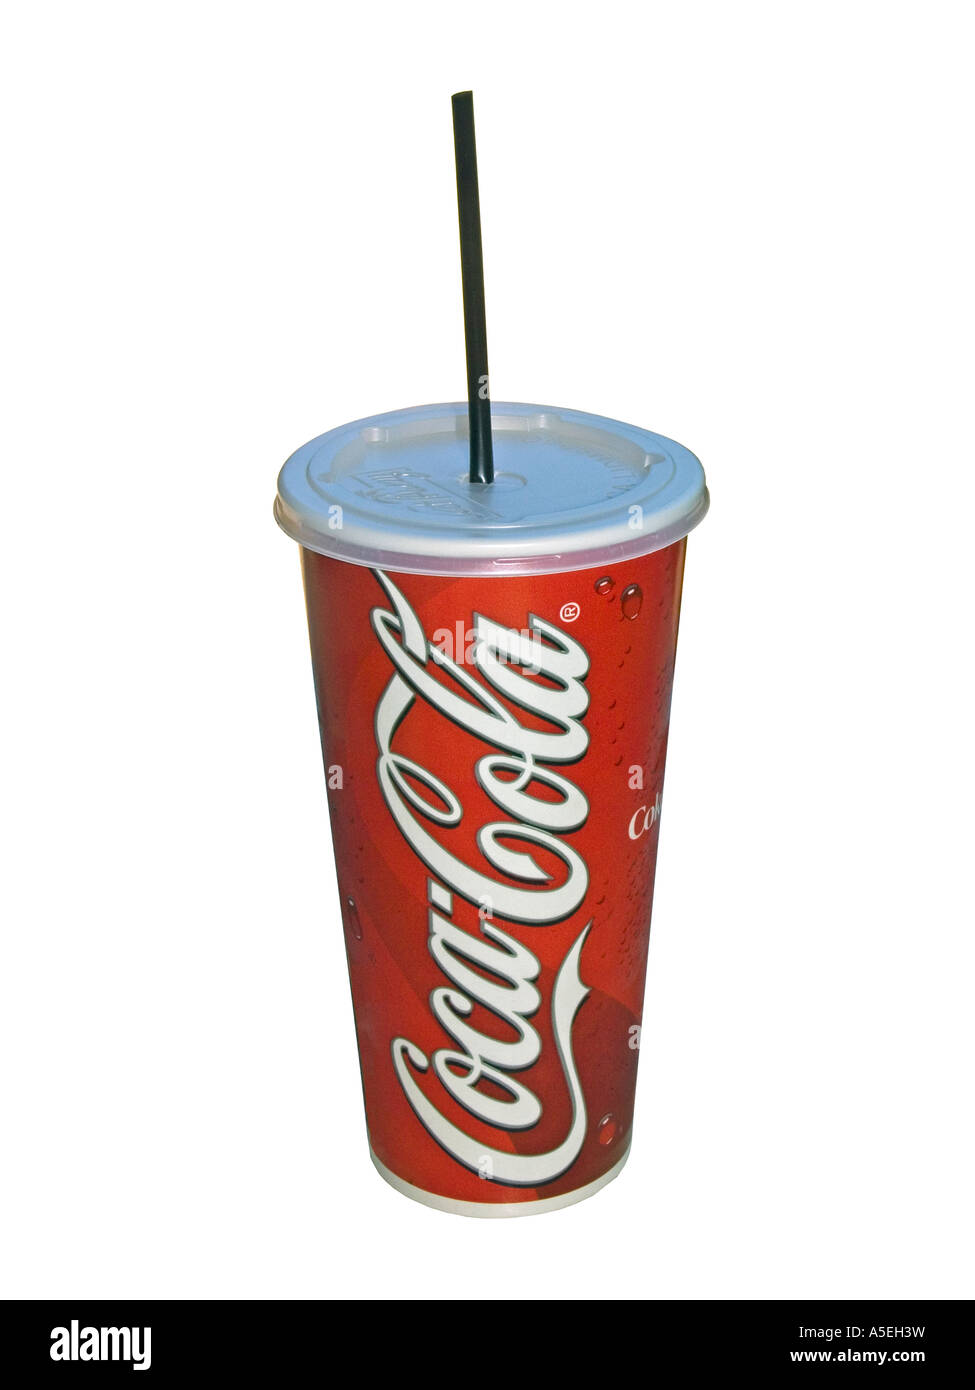 https://c8.alamy.com/comp/A5EH3W/red-coca-cola-milkshake-container-and-straw-against-a-white-background-A5EH3W.jpg